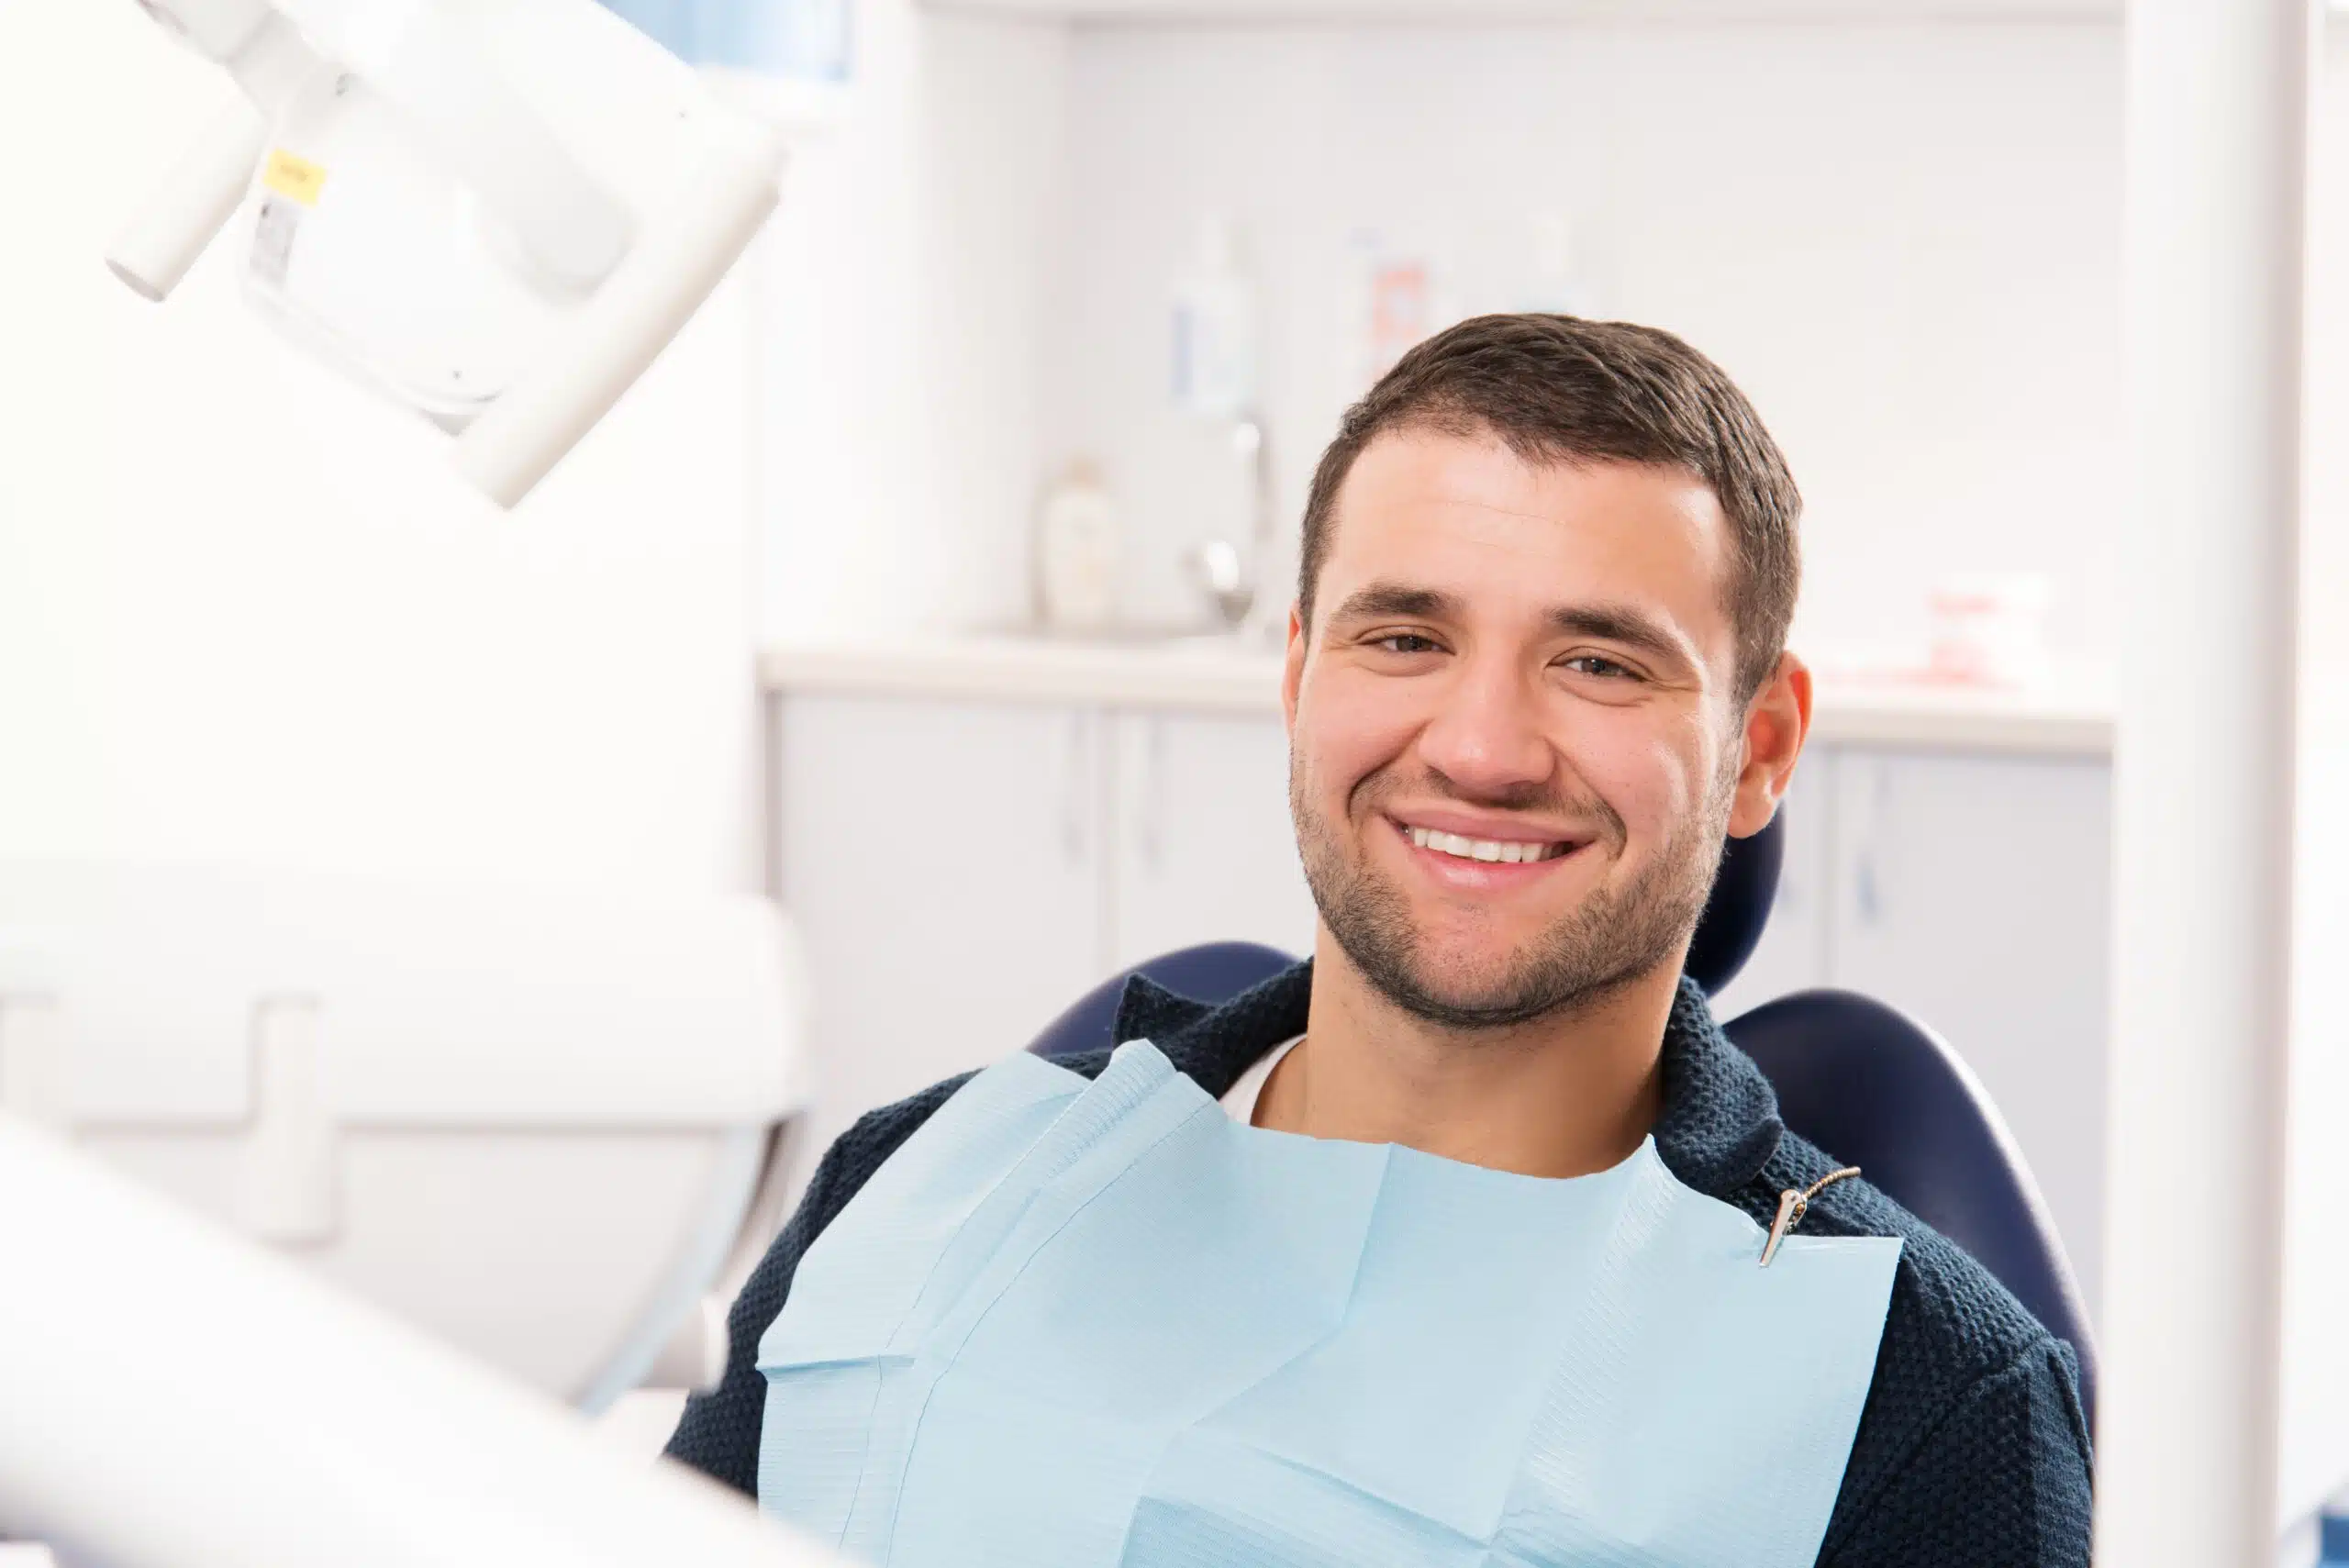 Restore your smile and regain your confidence with our comprehensive restorative dentistry services.